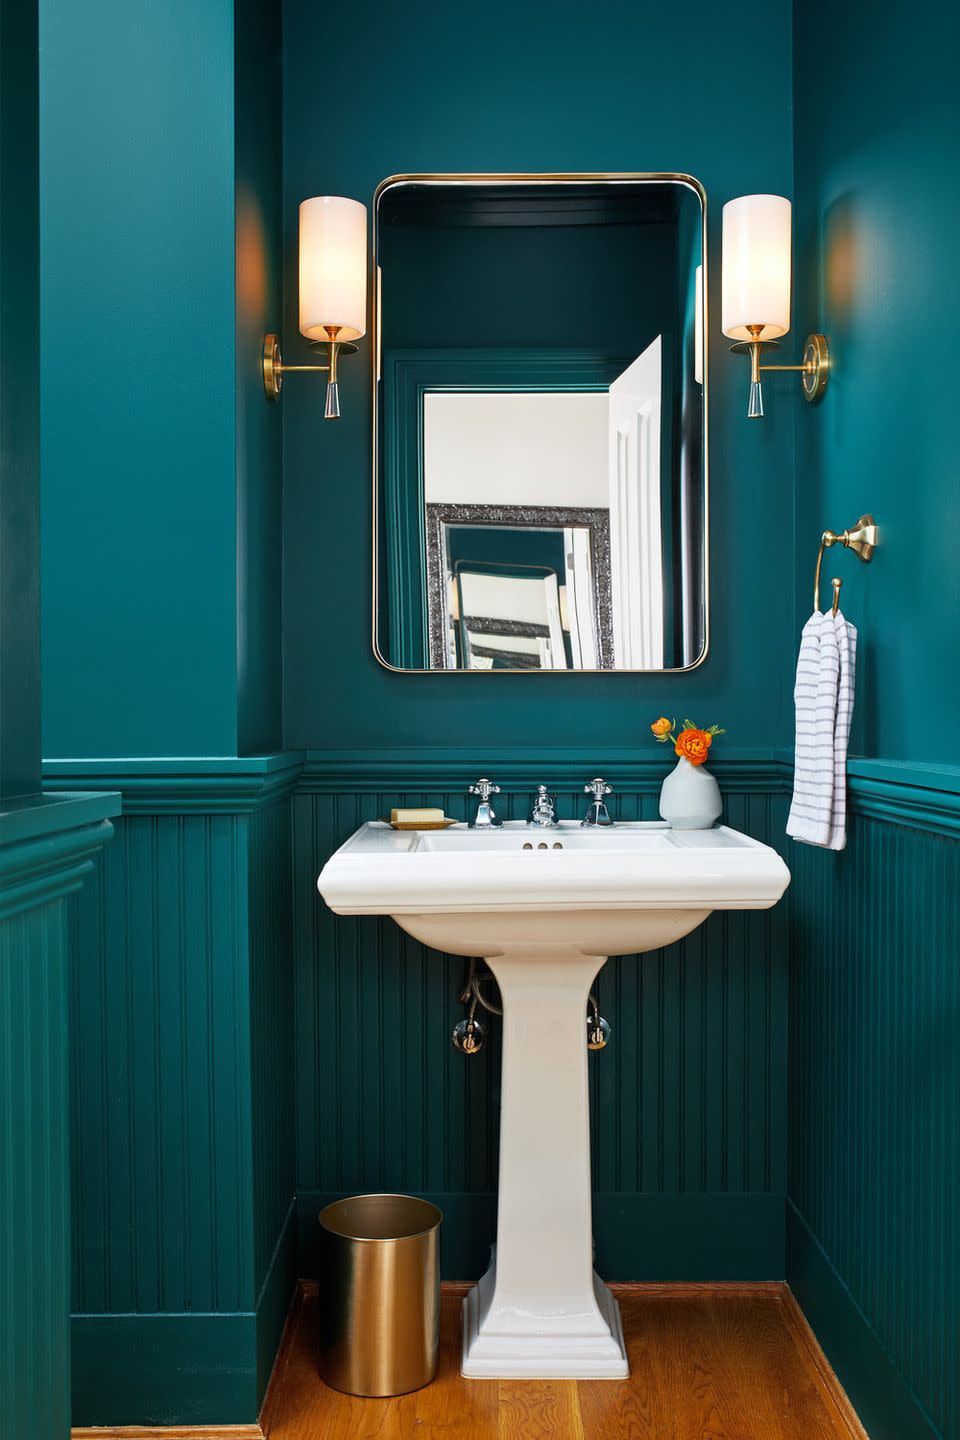 10 Rooms That Made Great Use of Teal Paint